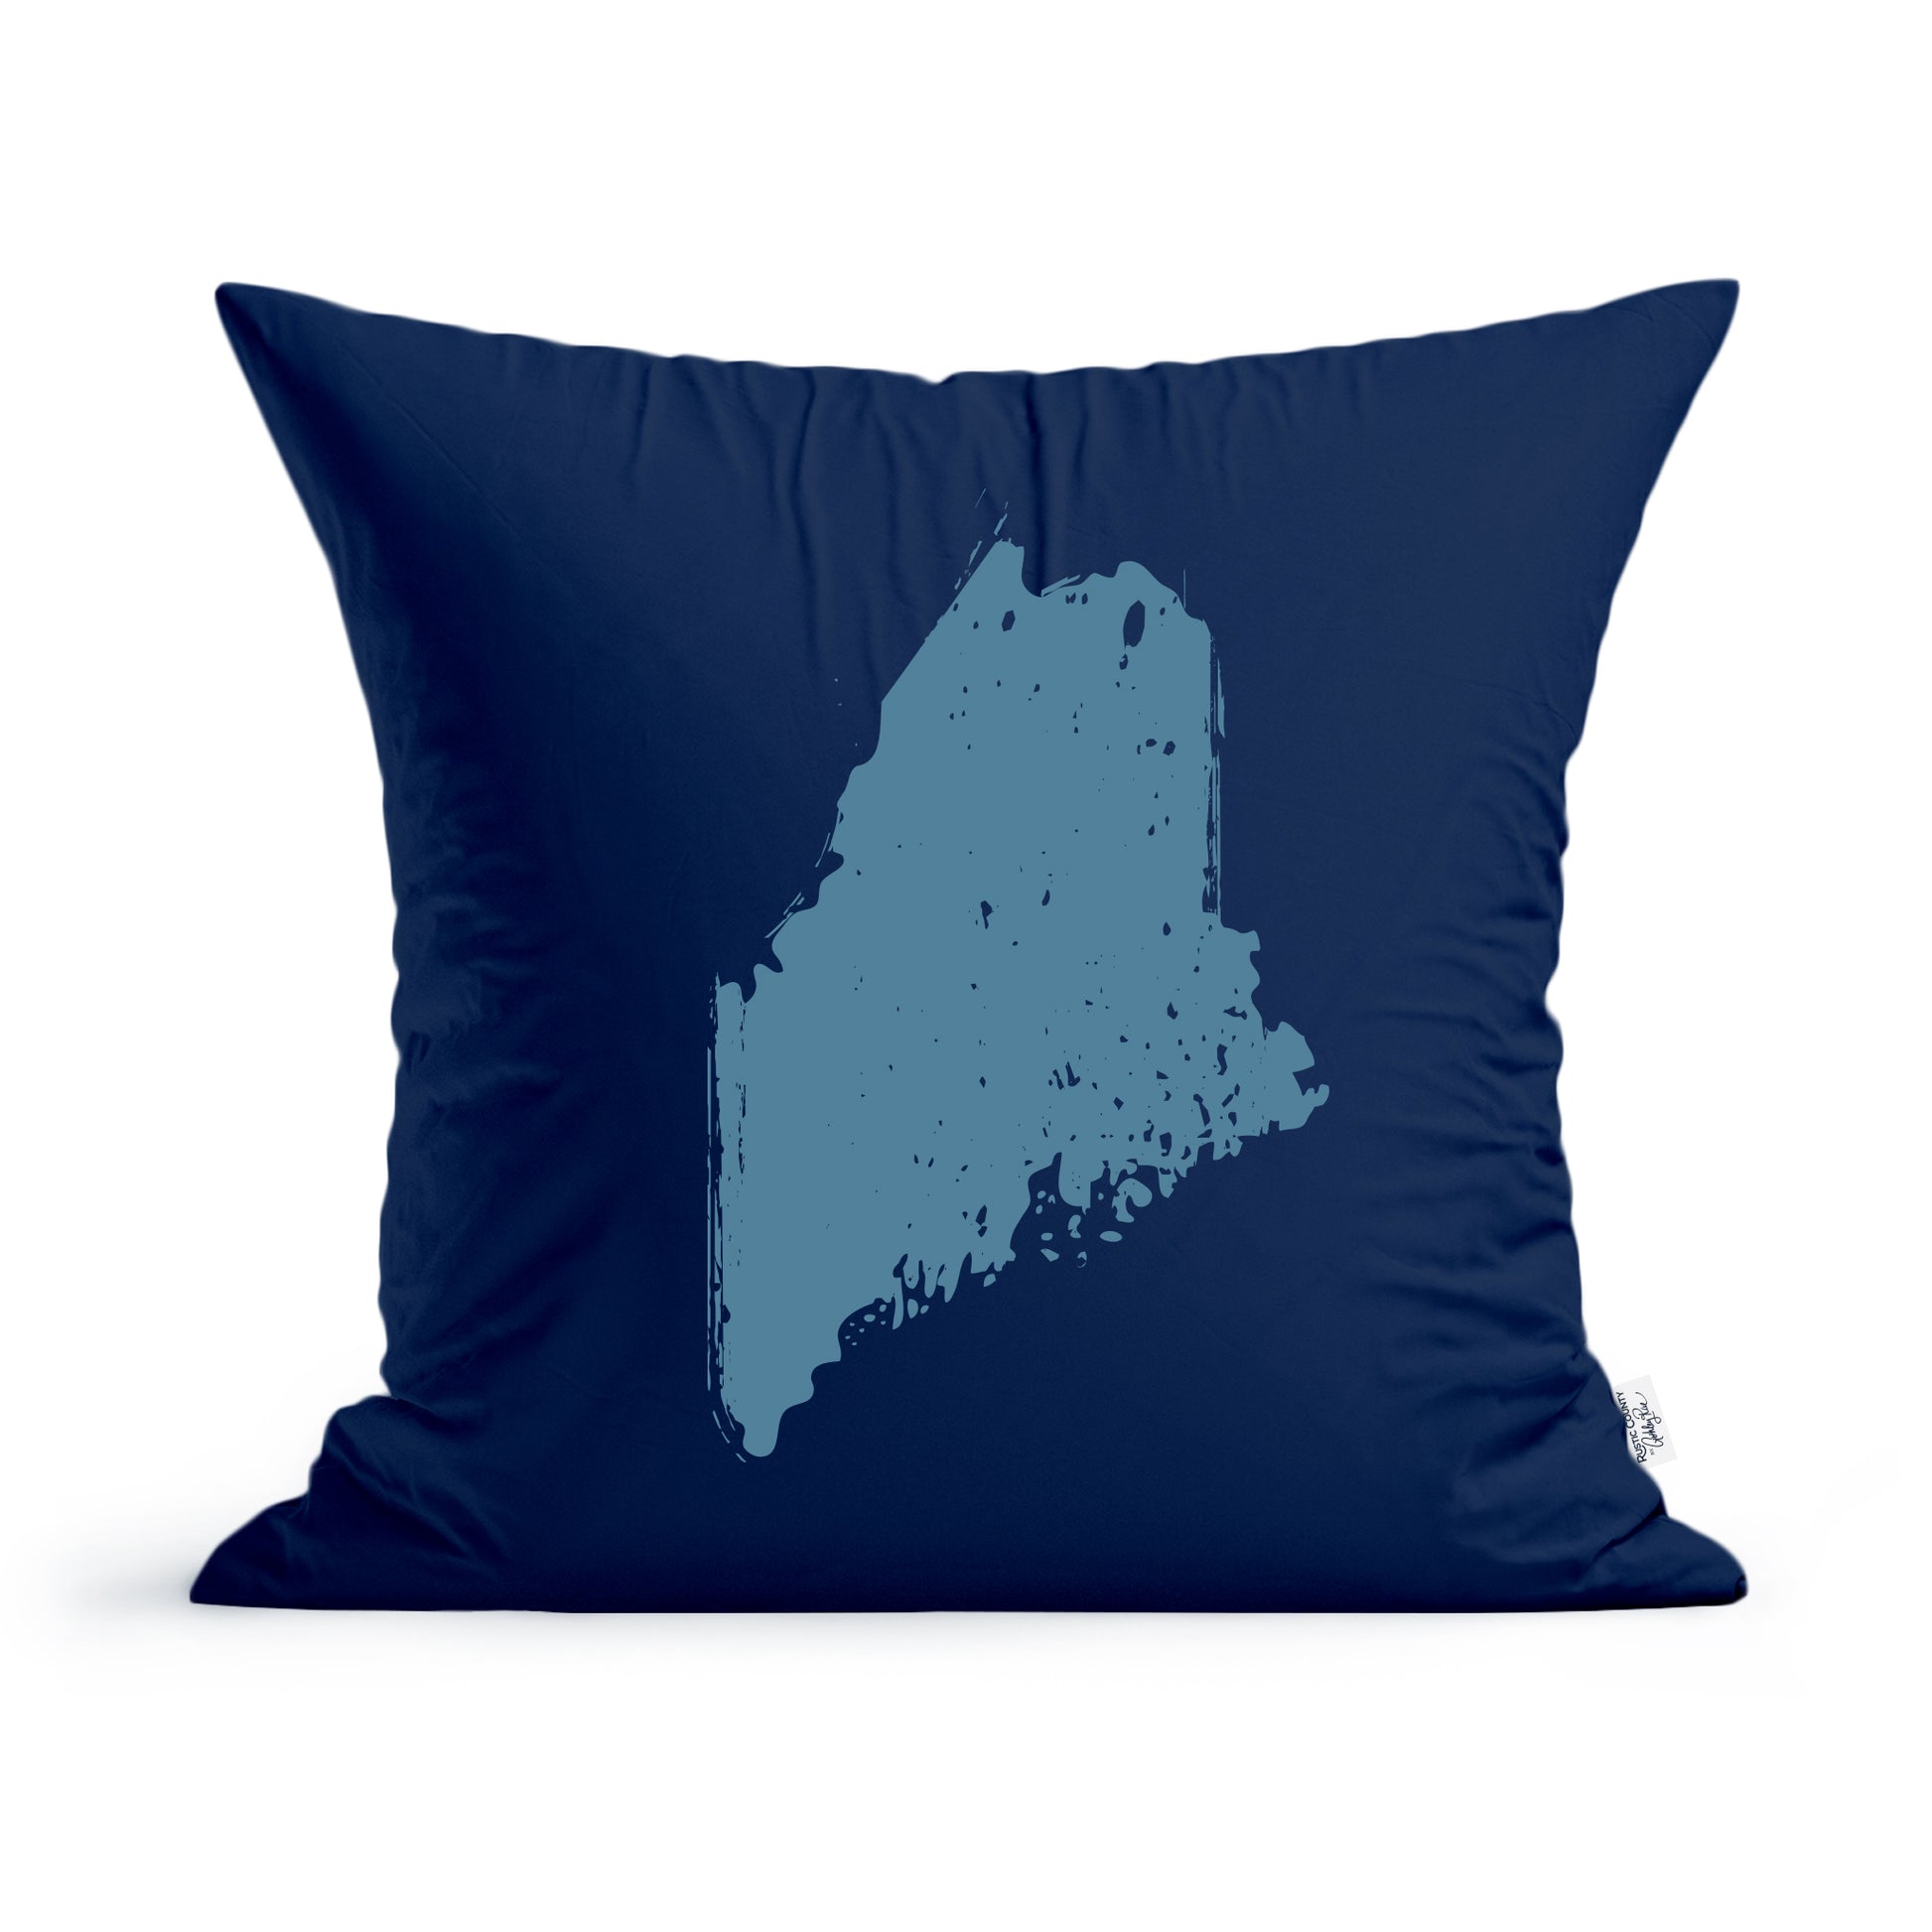 A Rustic County navy blue square State of Maine Pillow featuring a light blue silhouette of the state of Maine in a distressed print style, with a fluffy texture visible around the edges and a machine washable cotton pillow cover.